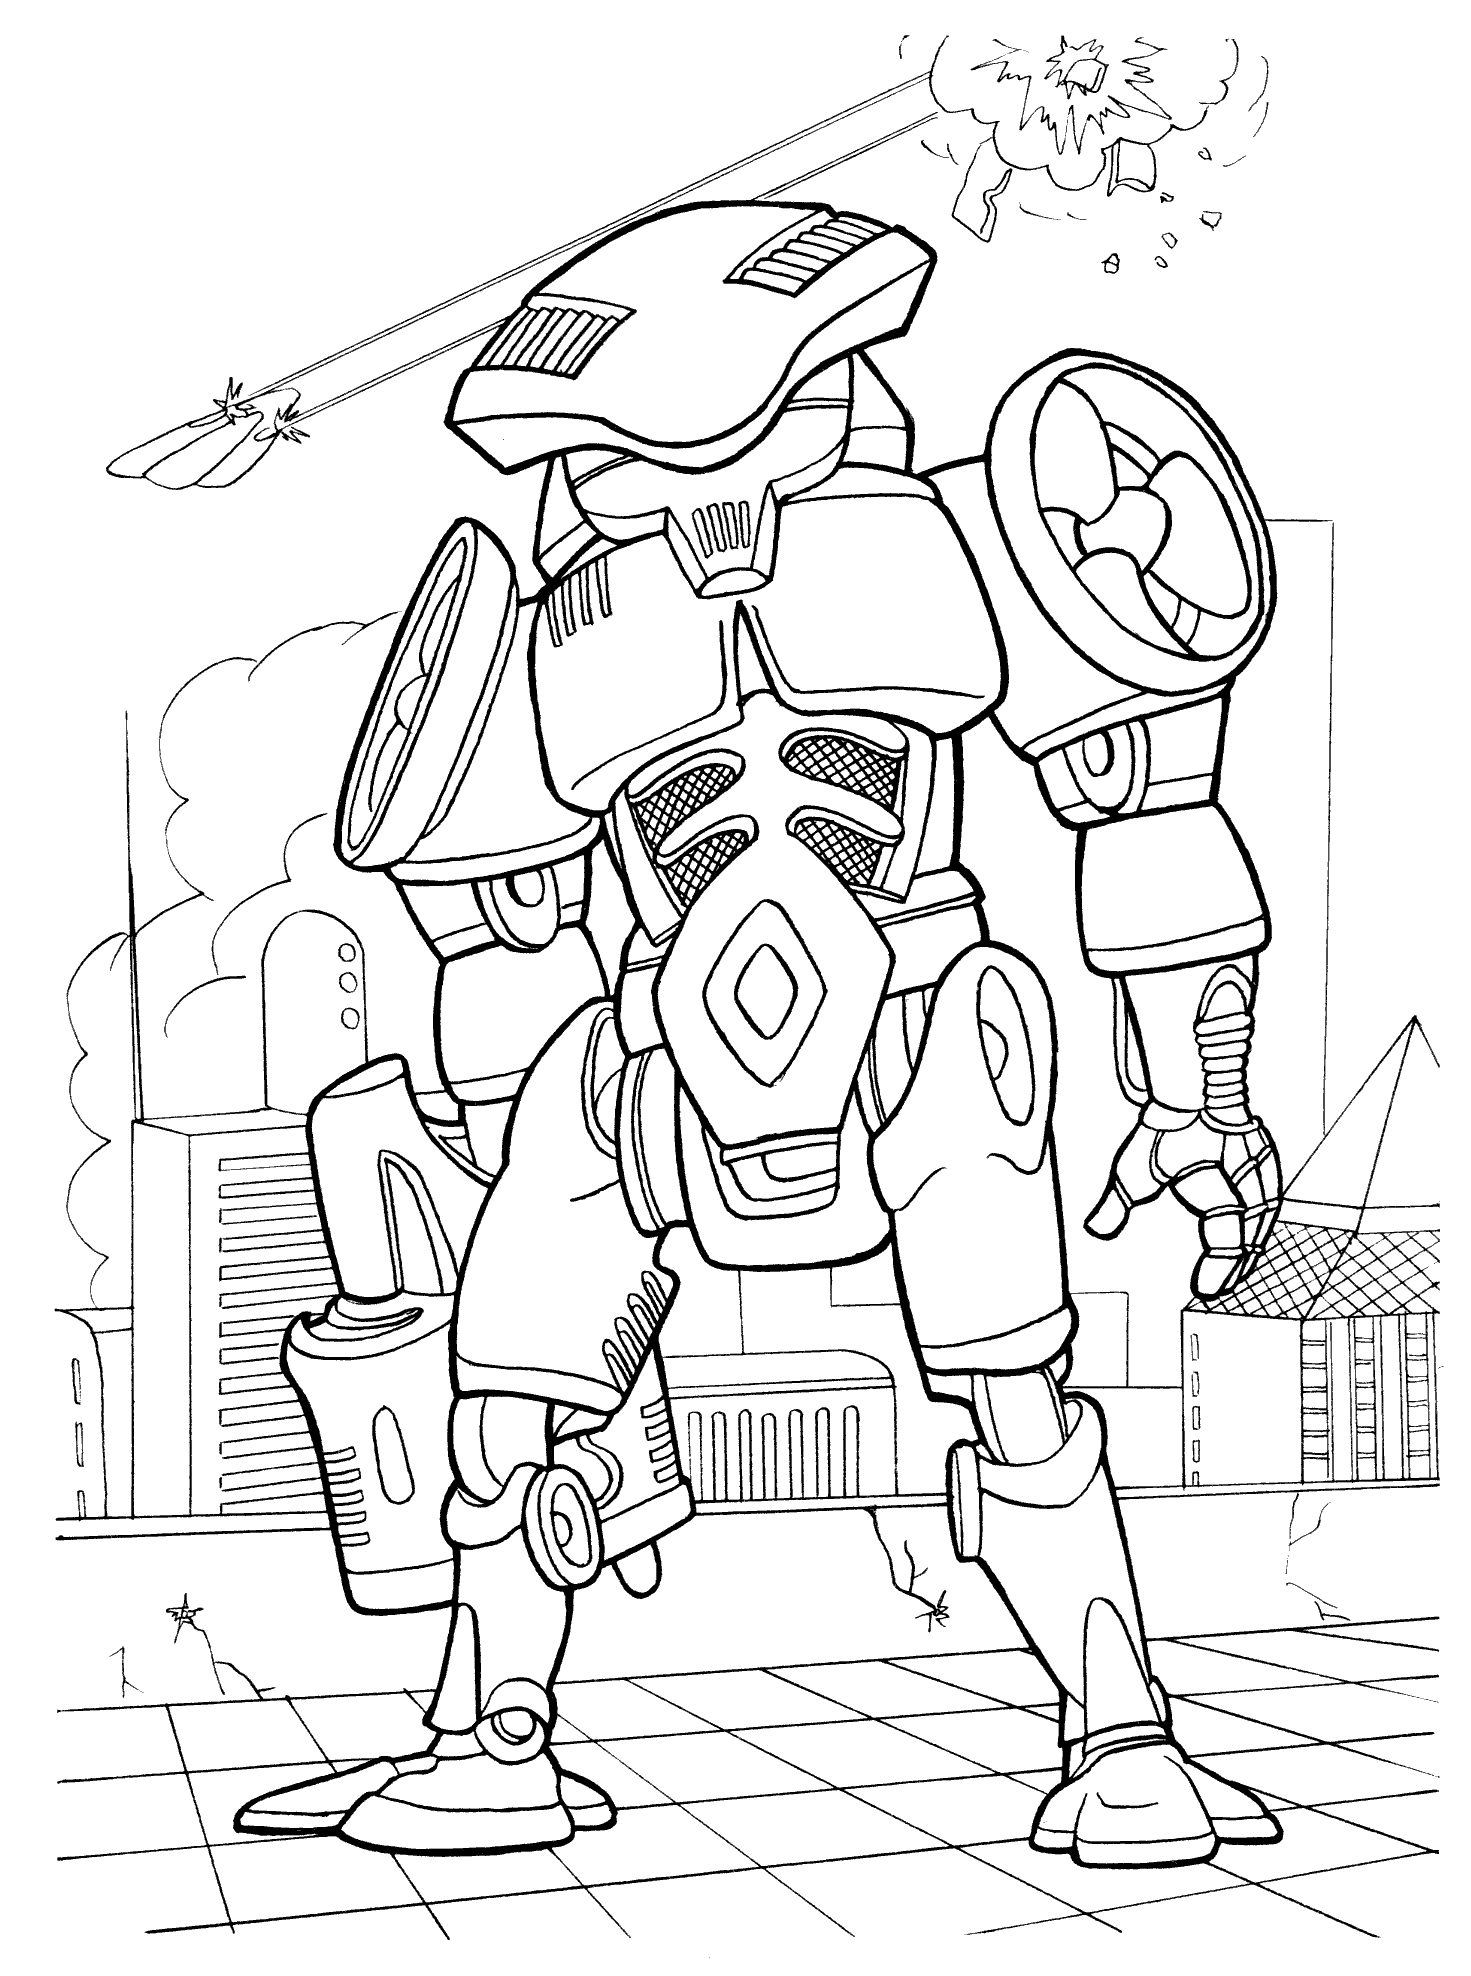 Coloring page - Cyborg on the Street